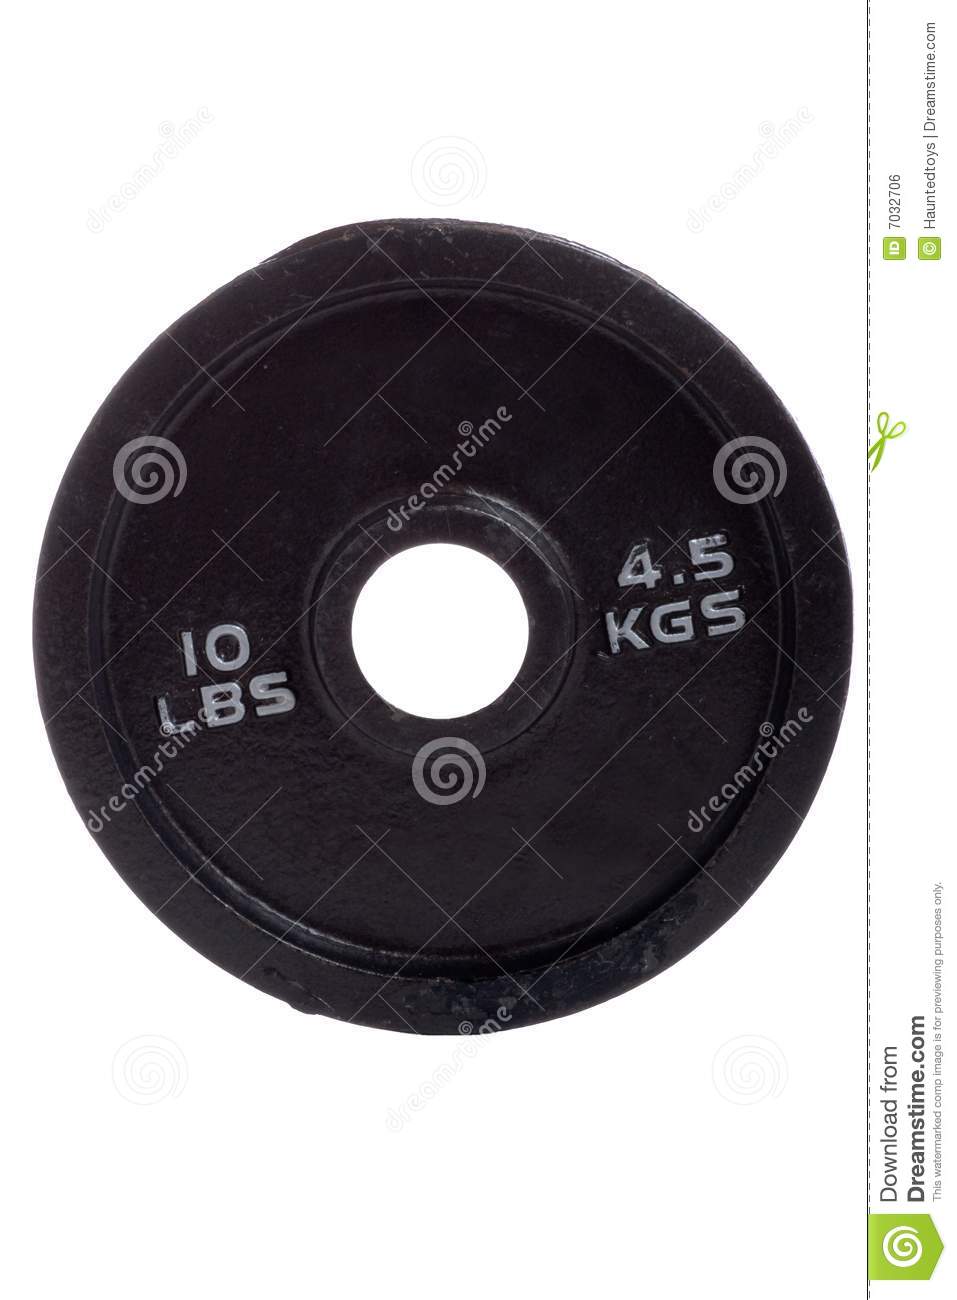 Barbell Plate Royalty Free Stock Image   Image  7032706